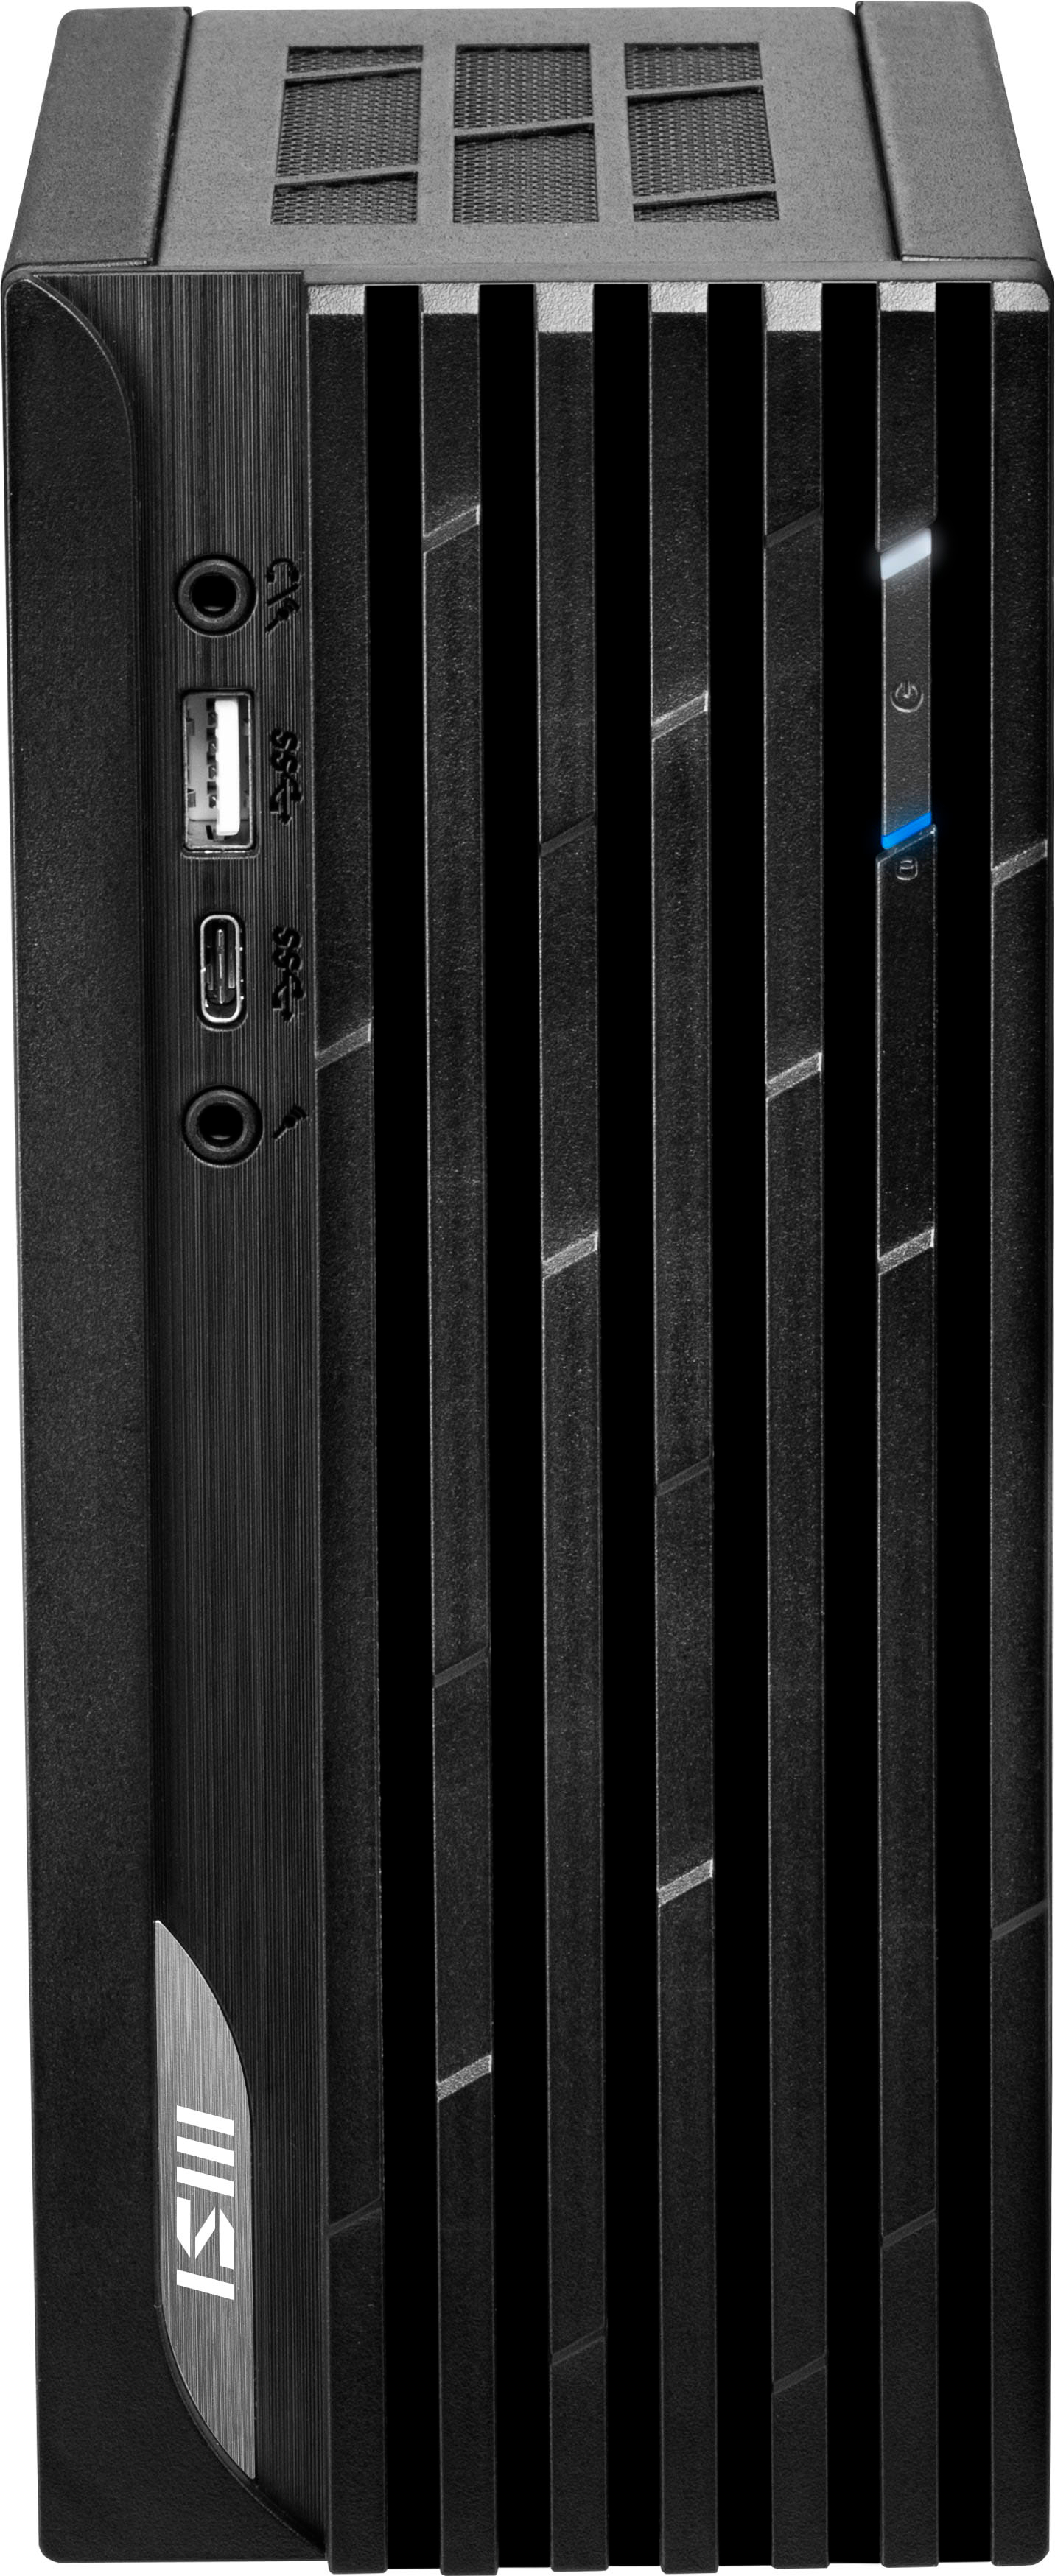 Back View: Certified Certified Used HP 8000 Small Form Factor Desktop PC with Intel Core 2 Duo Processor, 4GB Memory, 1TB Hard Drive and Windows 10 Pro (Monitor Not Included)